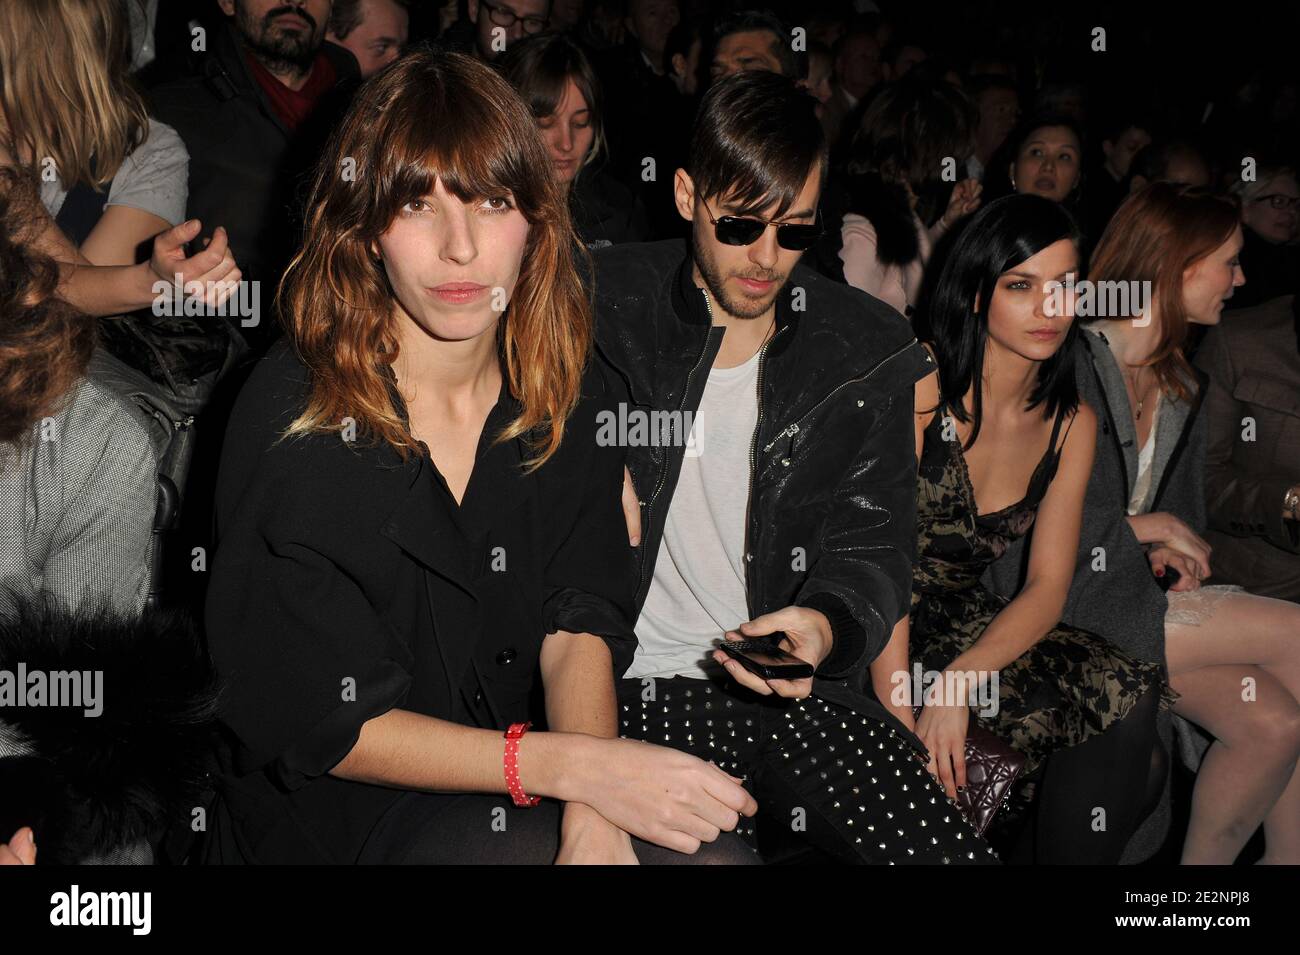 (L-R) Lou Doillon, Jared Leto and Leigh Lezard front row for the Dior Fall-Winter 2010/2011 Ready-to-Wear fashion show held at the Tuileries in Paris, France on March 5, 2010. Photo by Briquet-Nebinger-Guibbaud-Orban/ABACAPRESS.COM Stock Photo